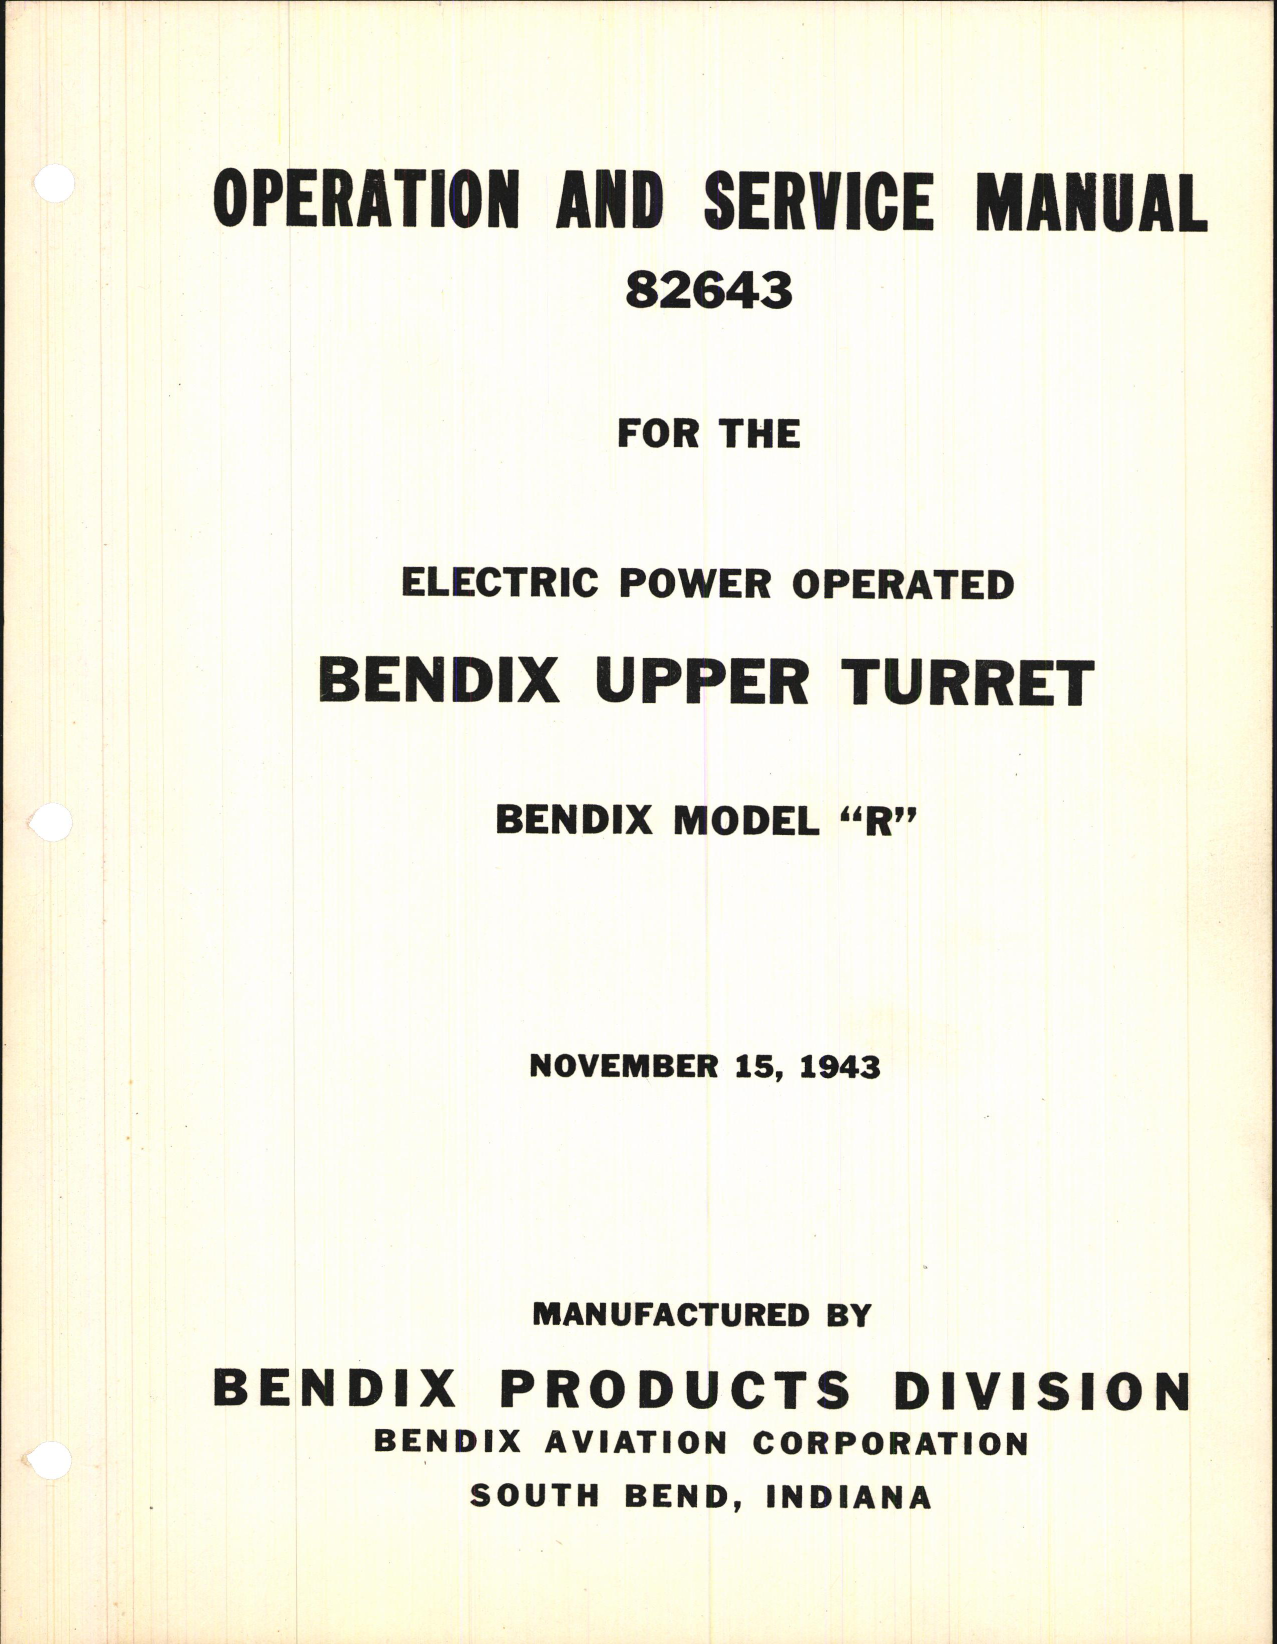 Sample page 1 from AirCorps Library document: Operation & Service Manual for the Electric Power Operated Bendix Upper Turret Model 